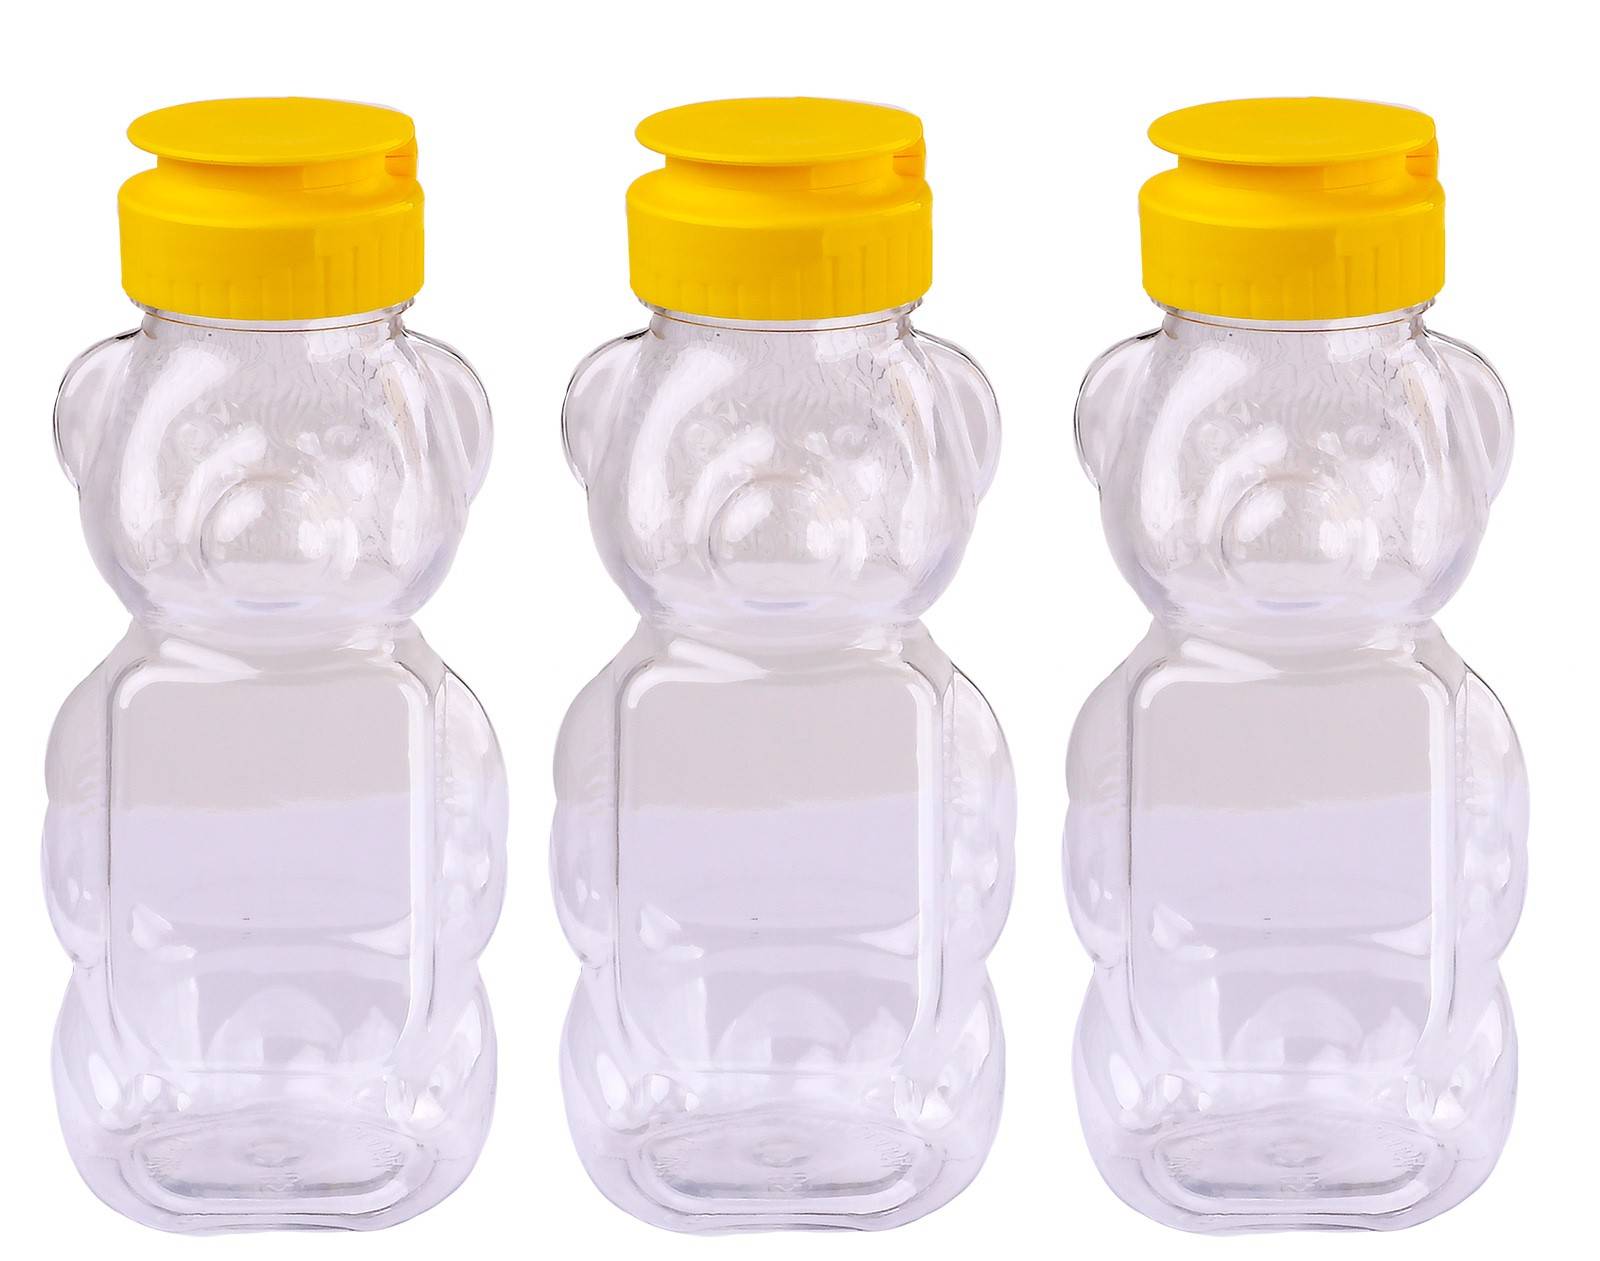 Carton of 200 x 350gm Clear Plastic Squeeze Bear Honey Bottle - Yellow lid